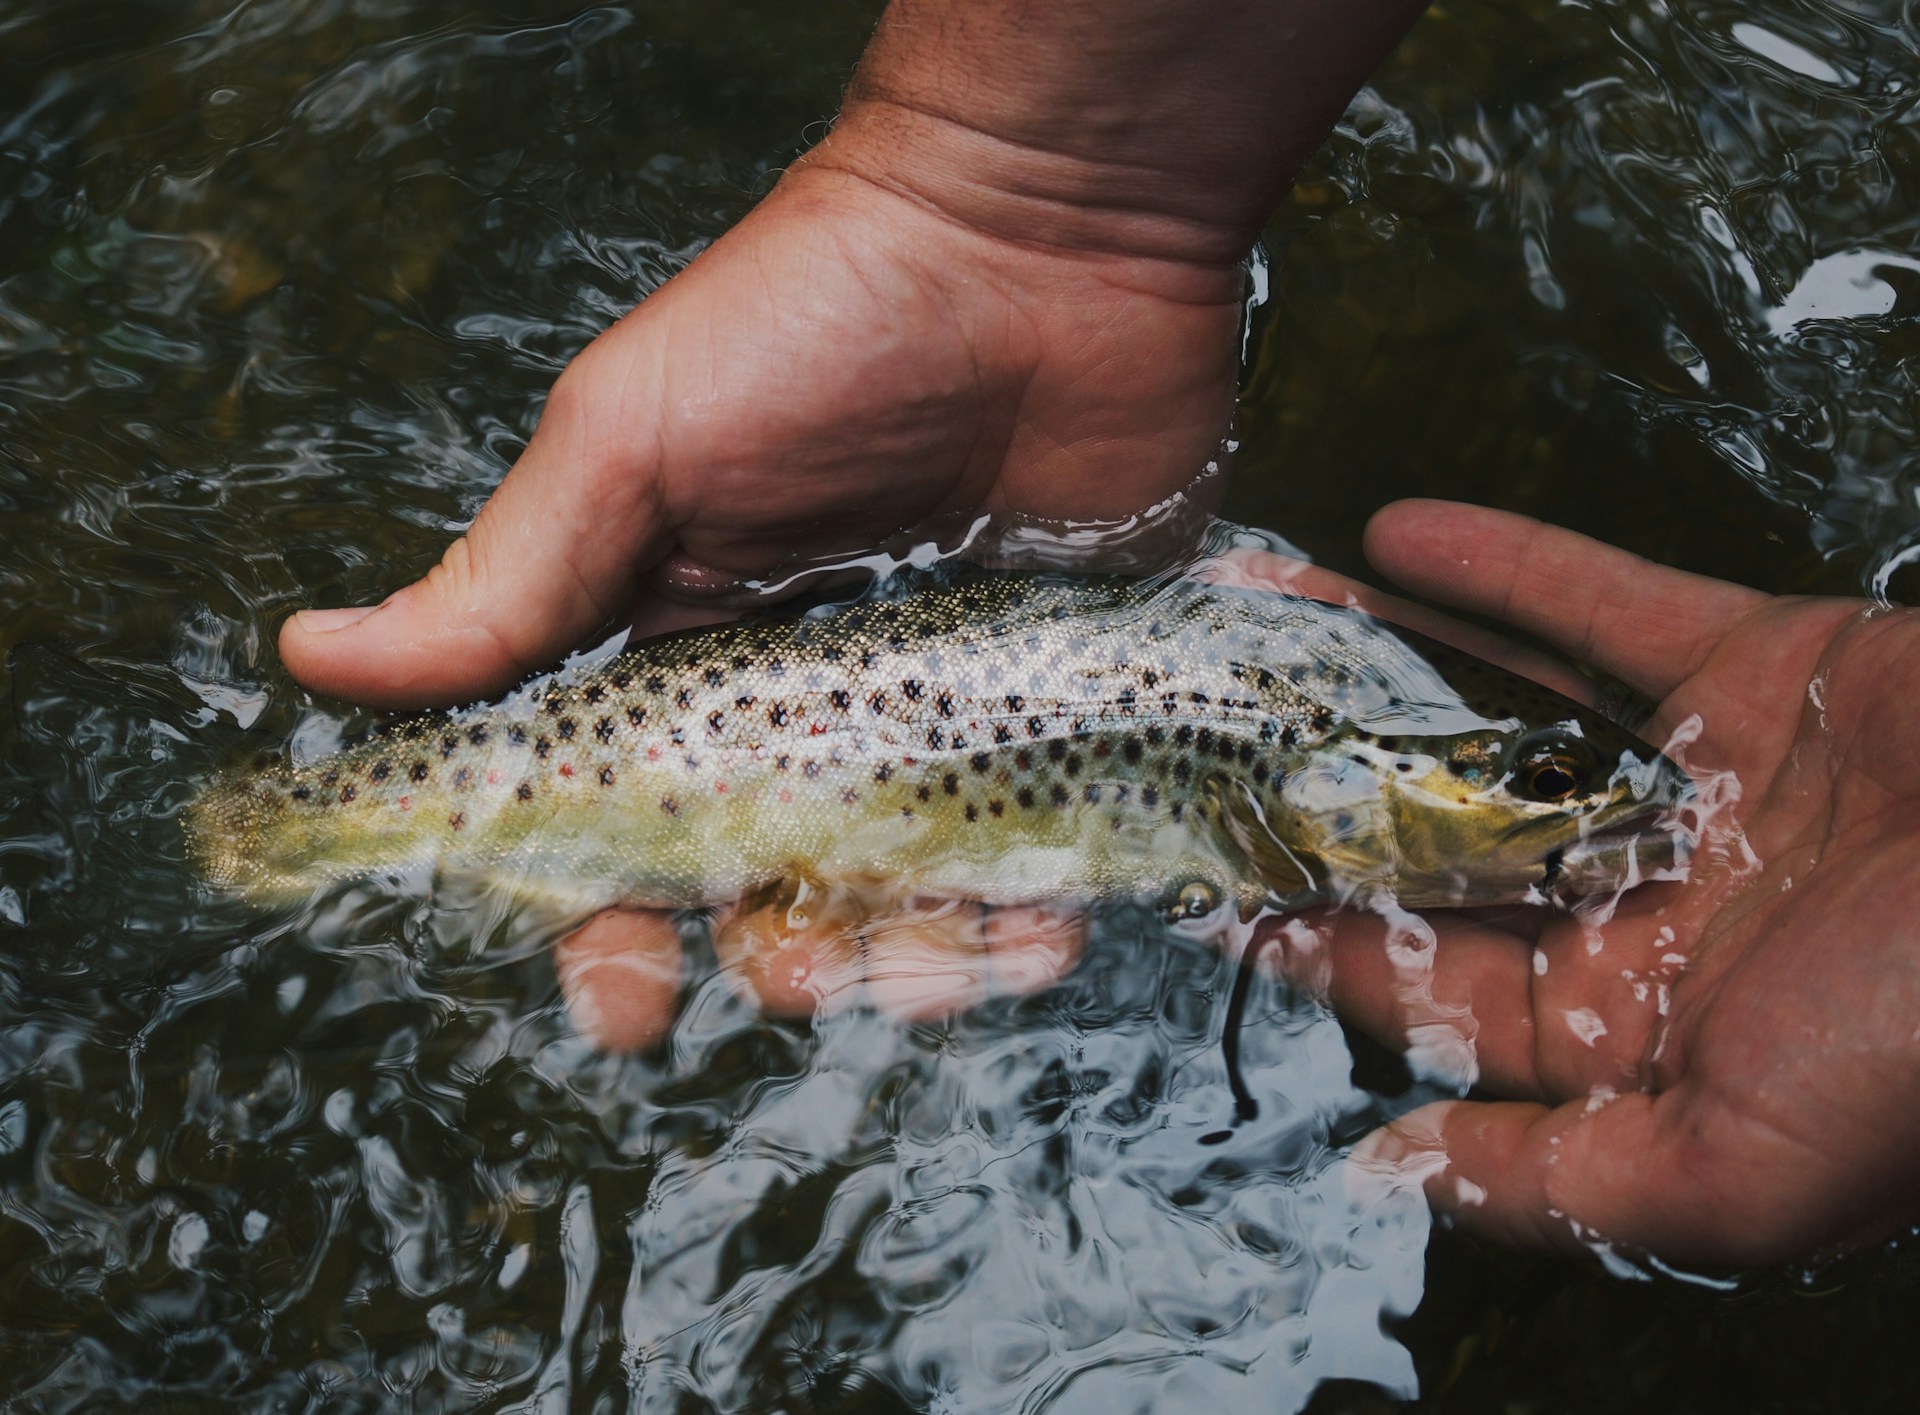 A person holding a trout above water with one hand underneath and the other gently gripping the fish.